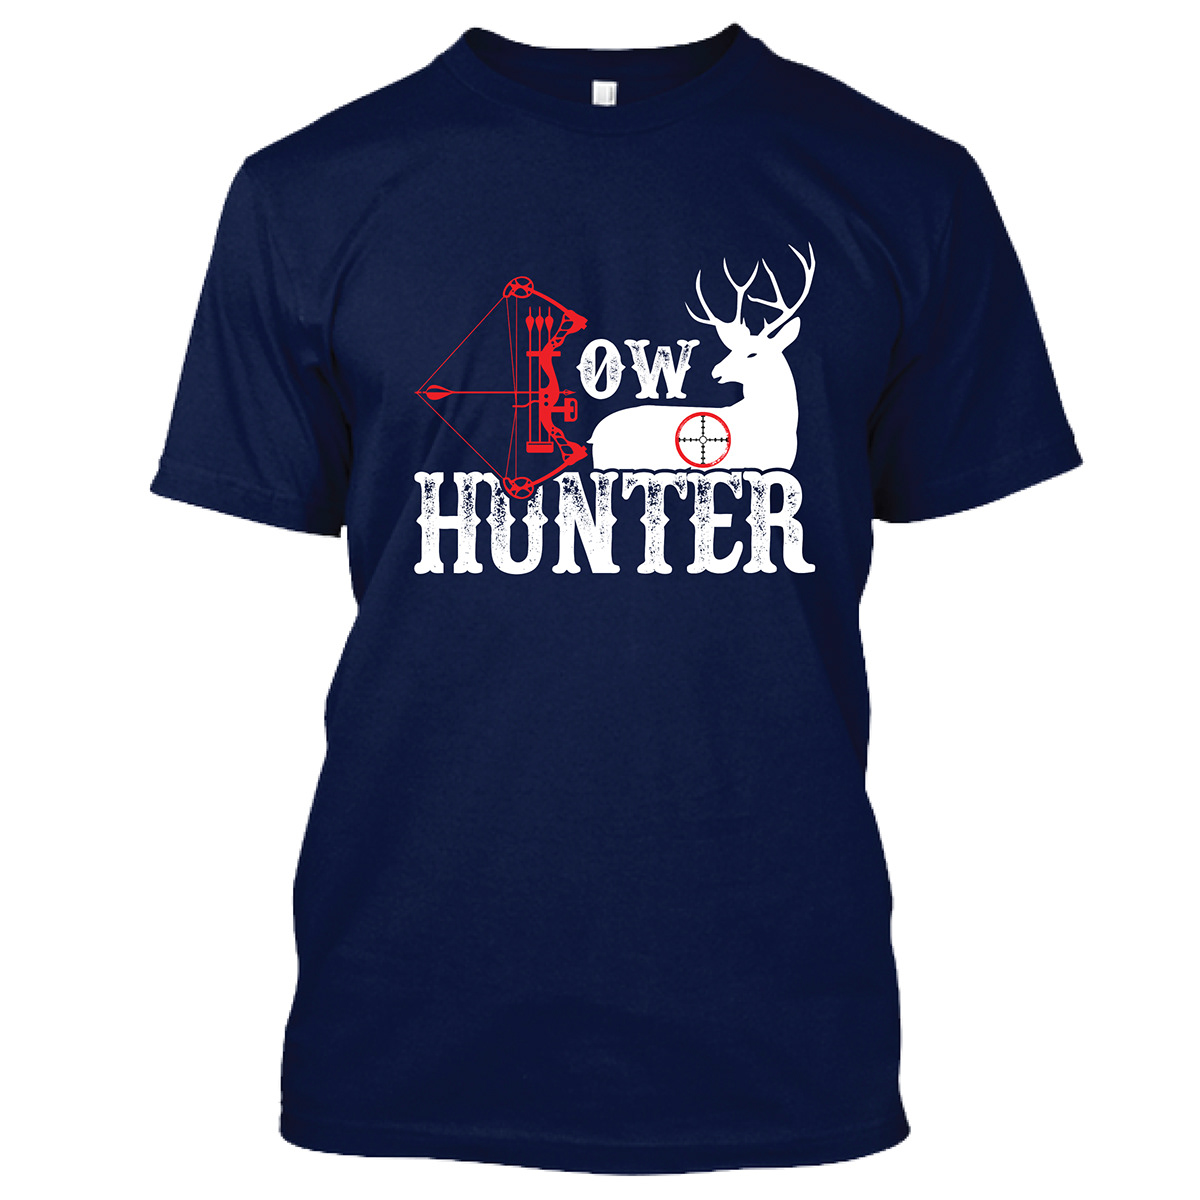 Hunting T-shirt Design ( Free Download - PNG ) on Behance